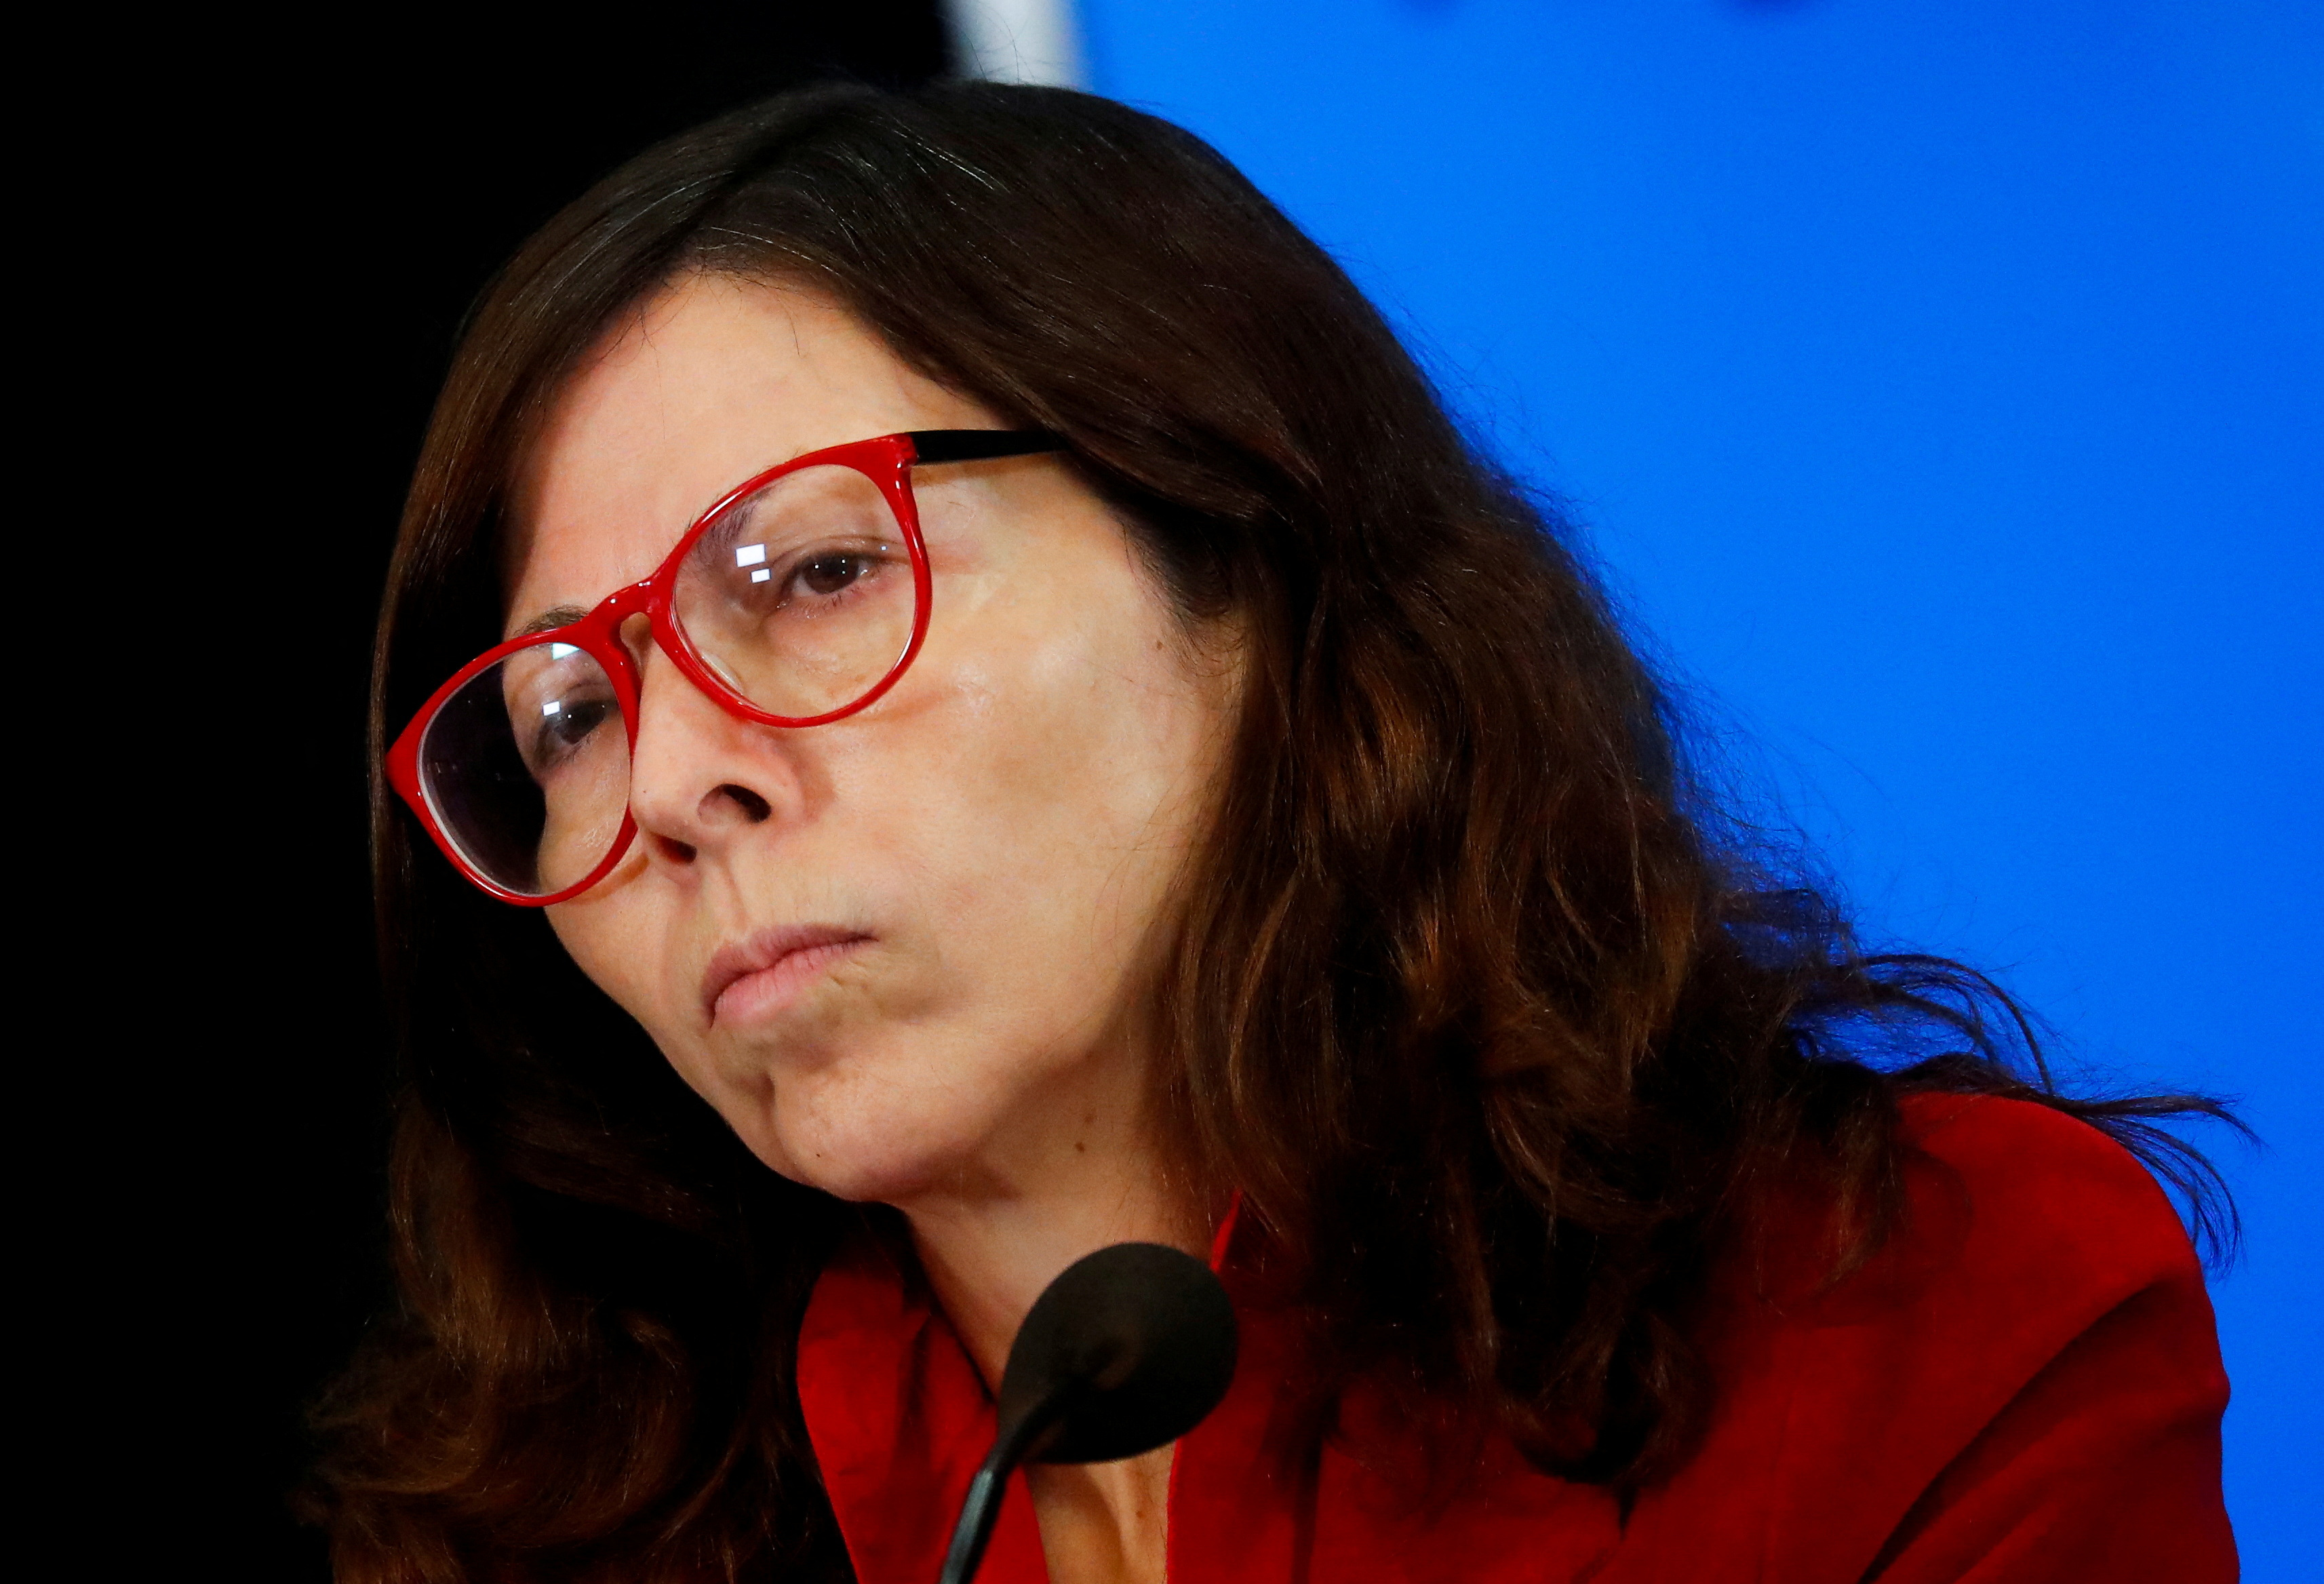 FILE PHOTO: Argentina's new Economy Minister Silvina Batakis looks on during a news conference at the Economy Ministry, in Buenos Aires, Argentina, July 11, 2022. REUTERS/Agustin Marcarian/File Photo